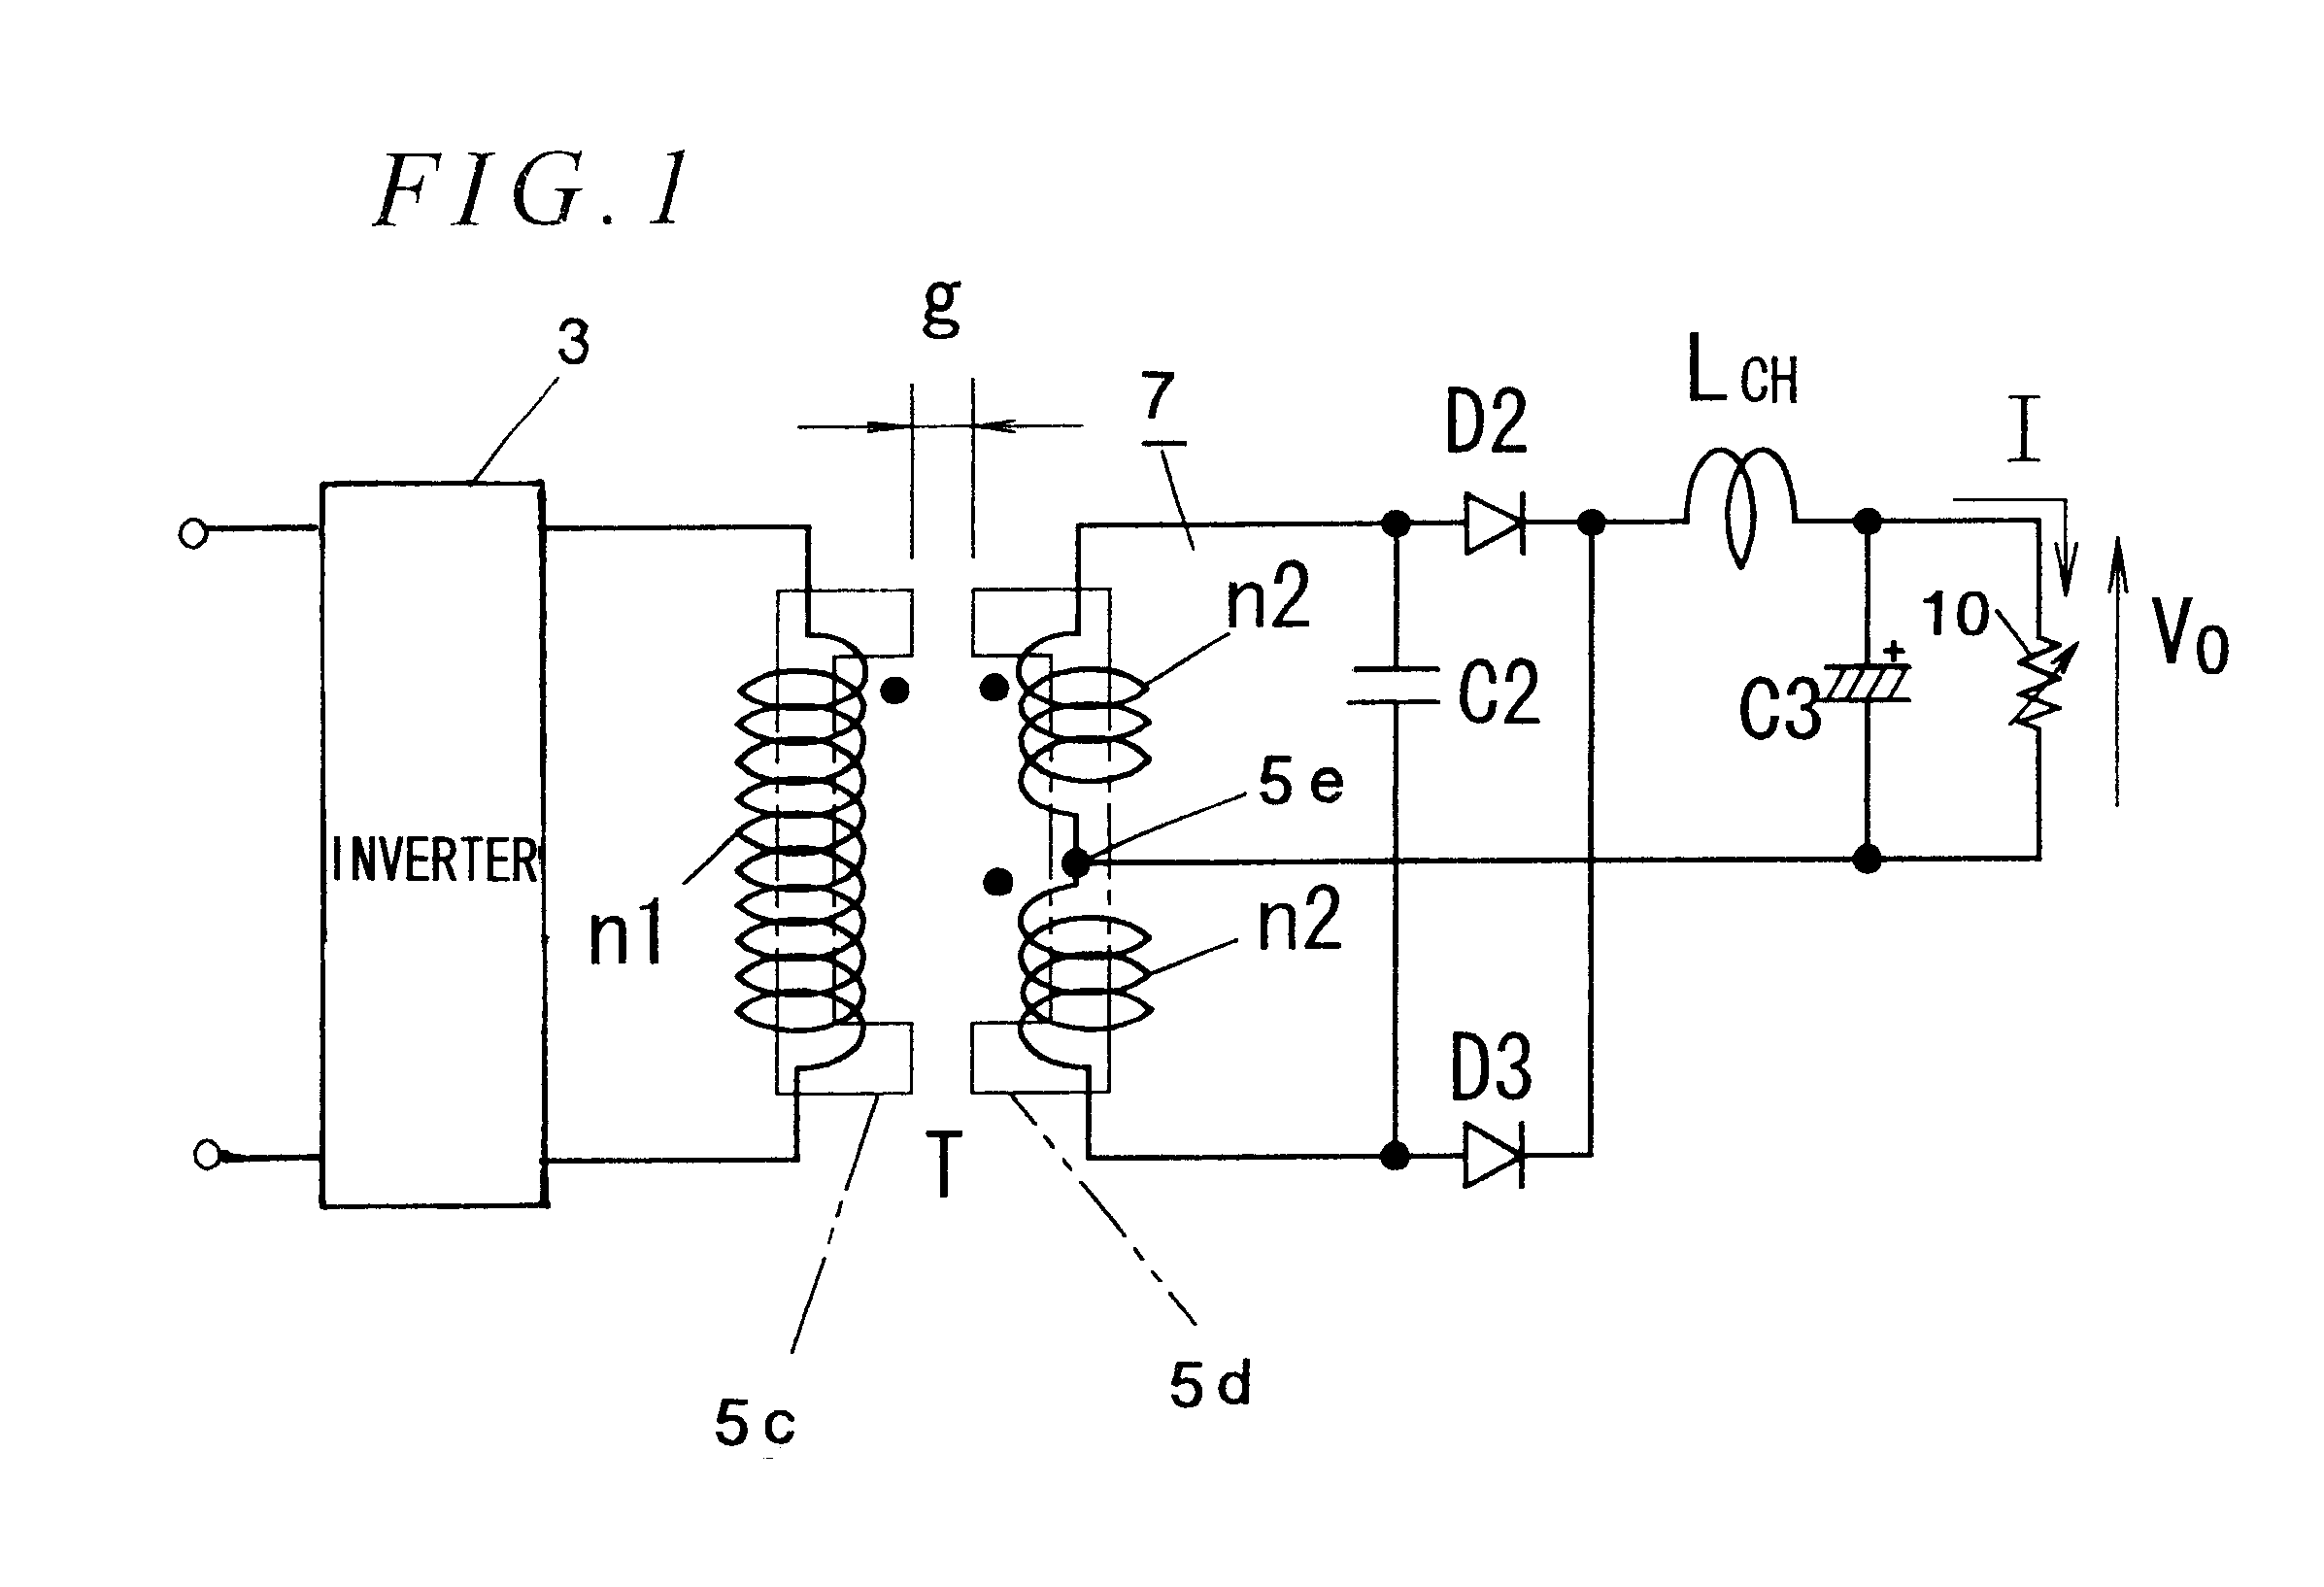 Non-contact electrical power transmission system having function of making load voltage constant